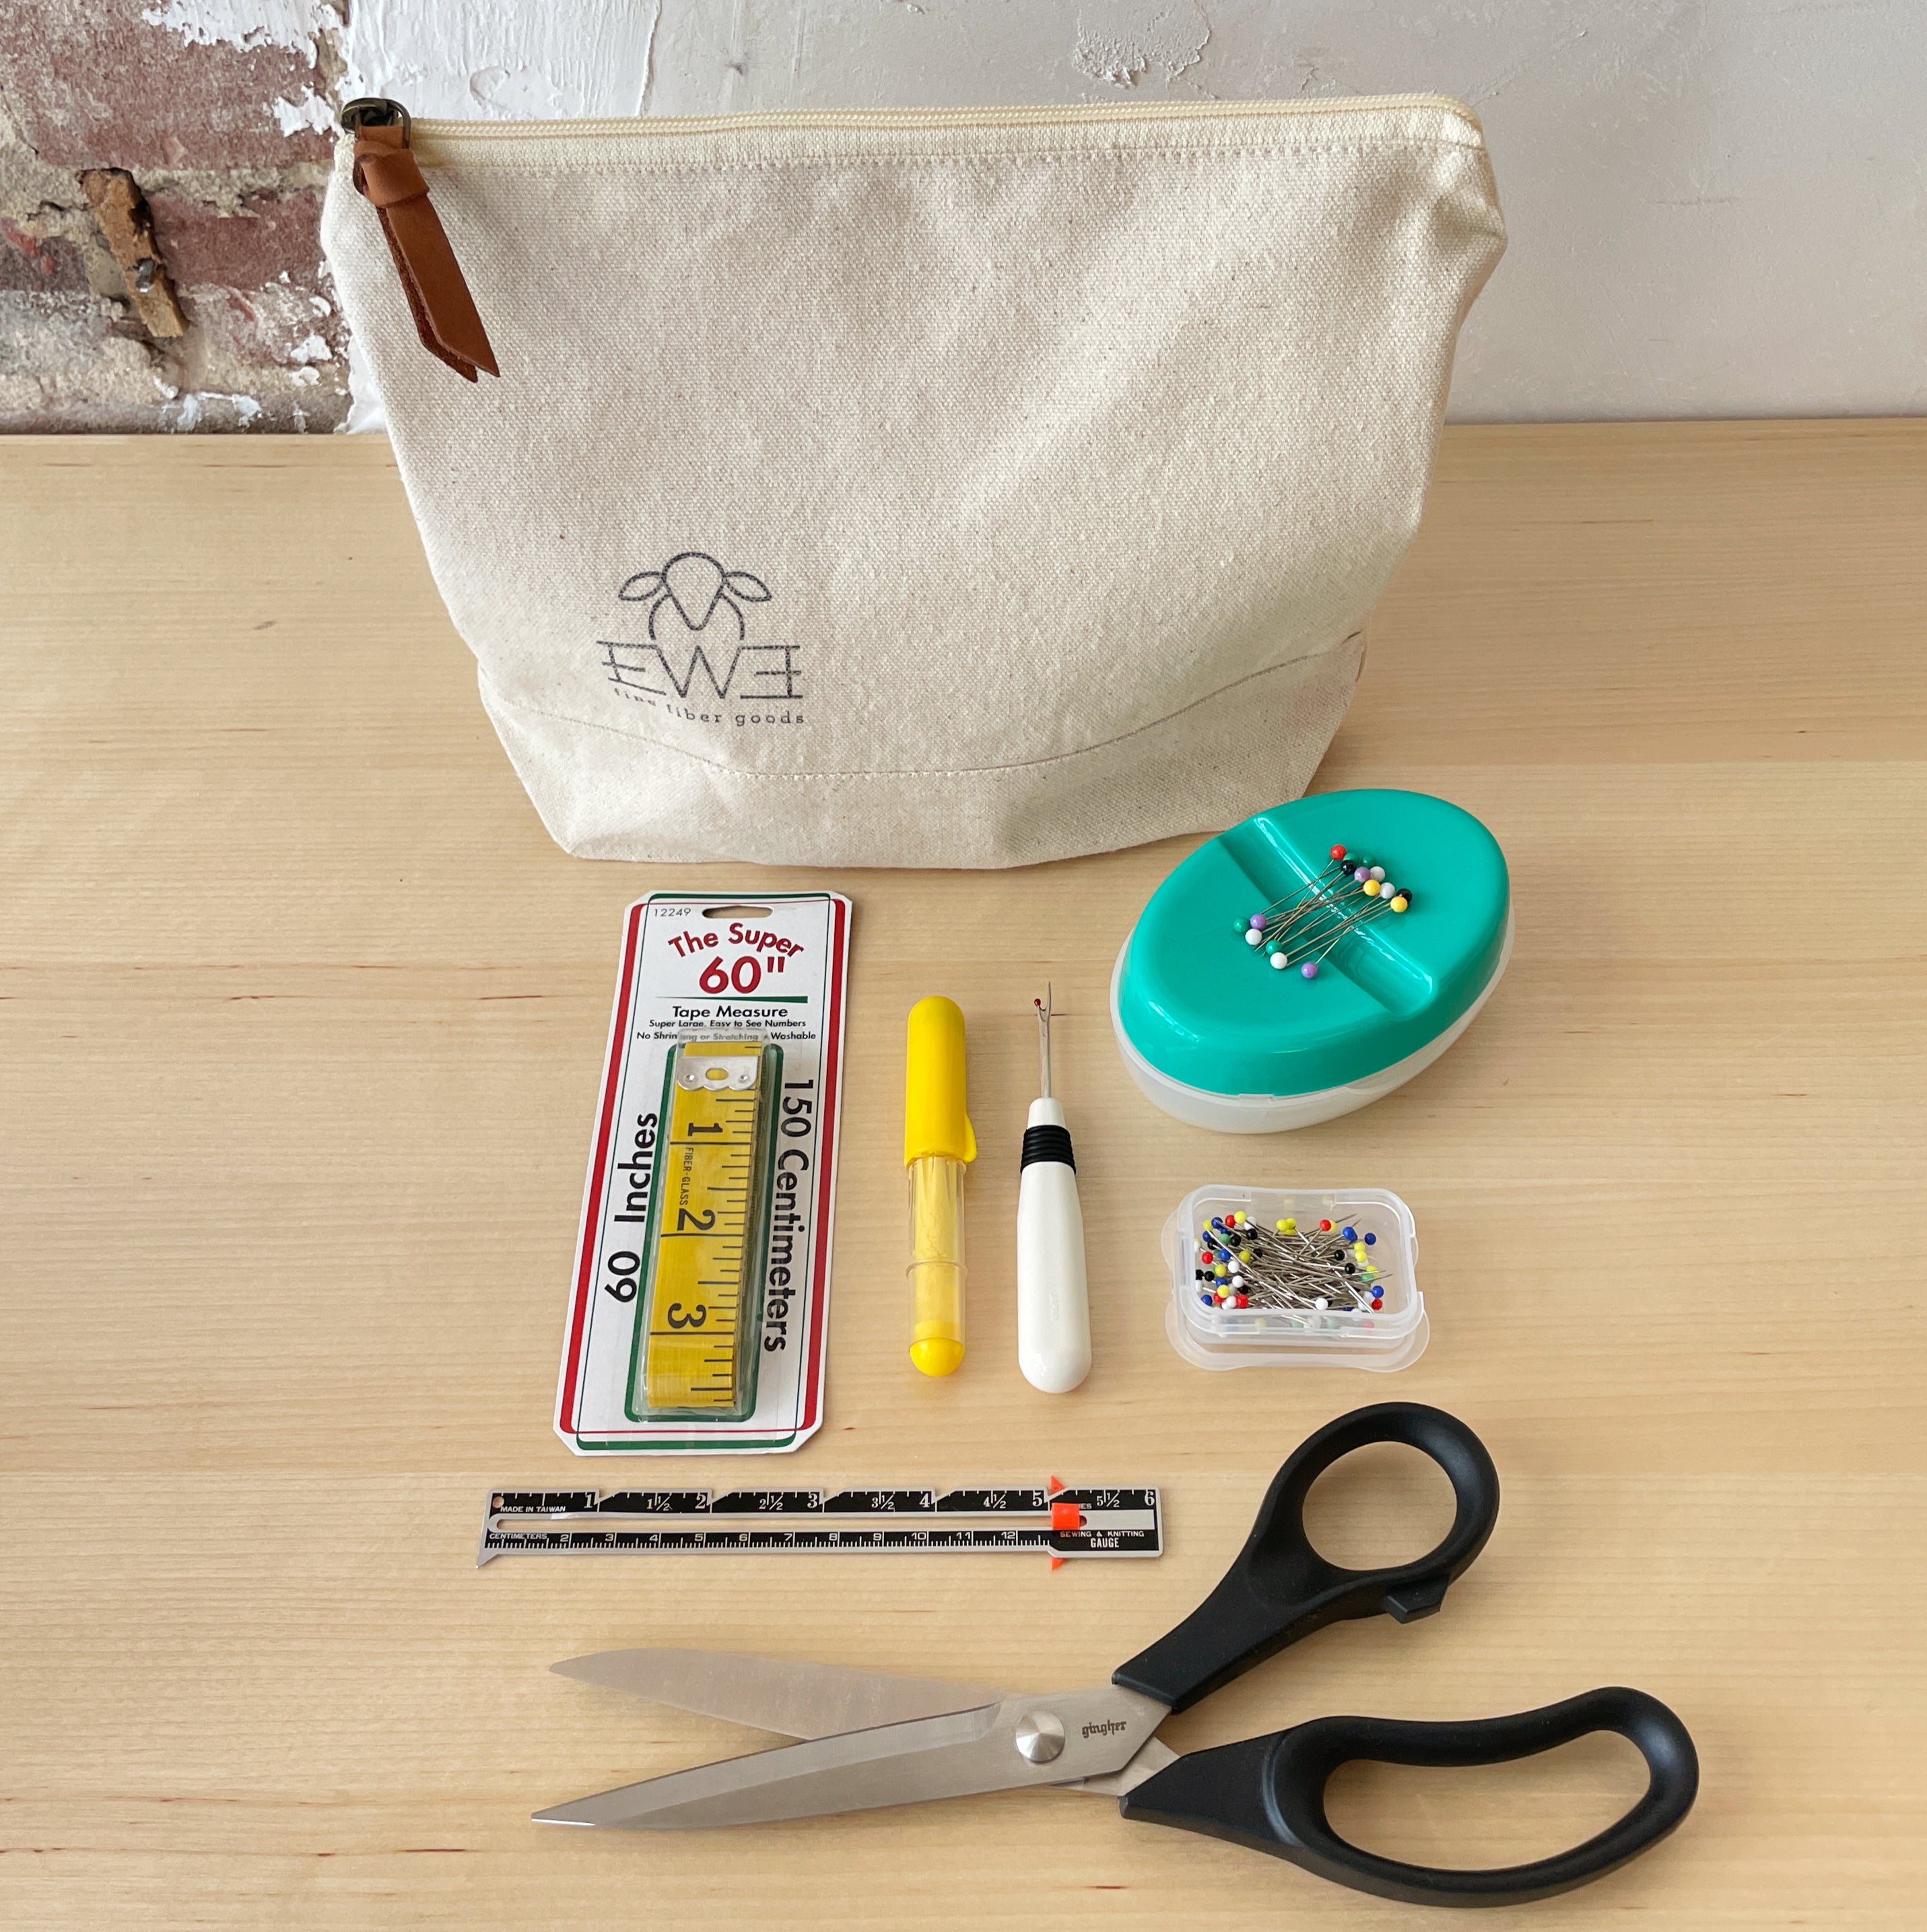 Essential Sewing Tools for Beginners